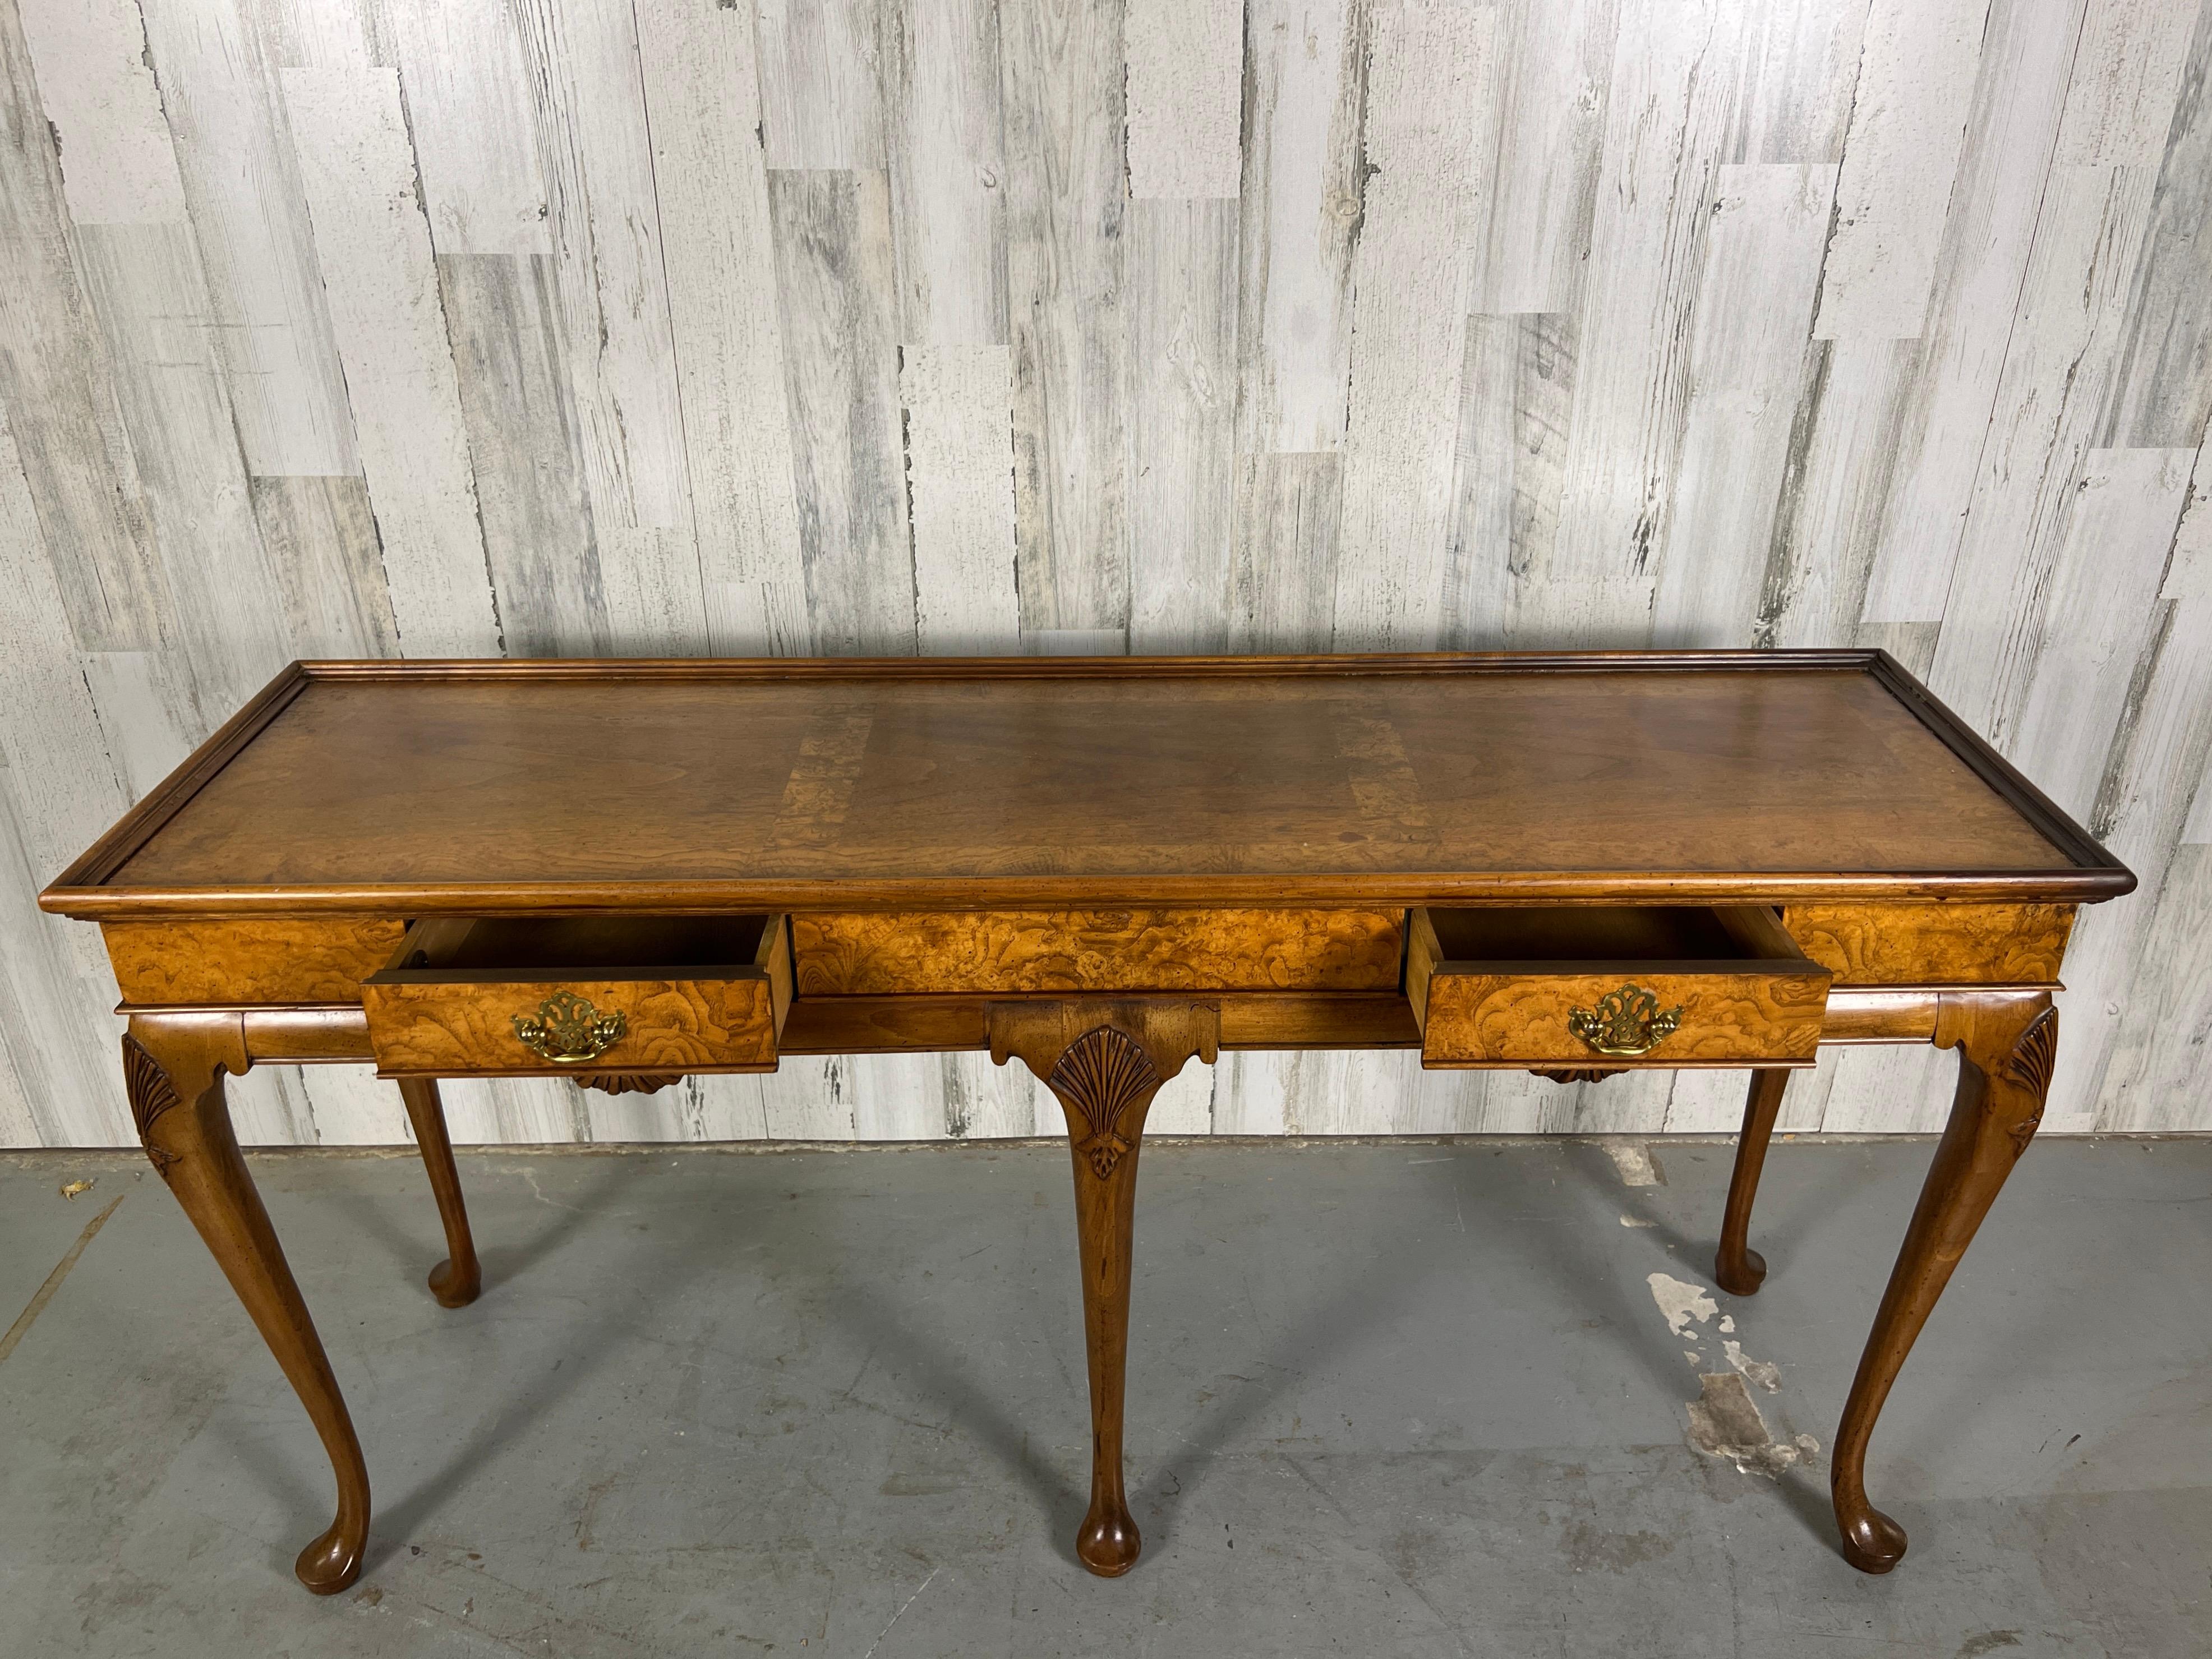 20th Century Queen Anne Style Burl-Wood Console Table by Baker